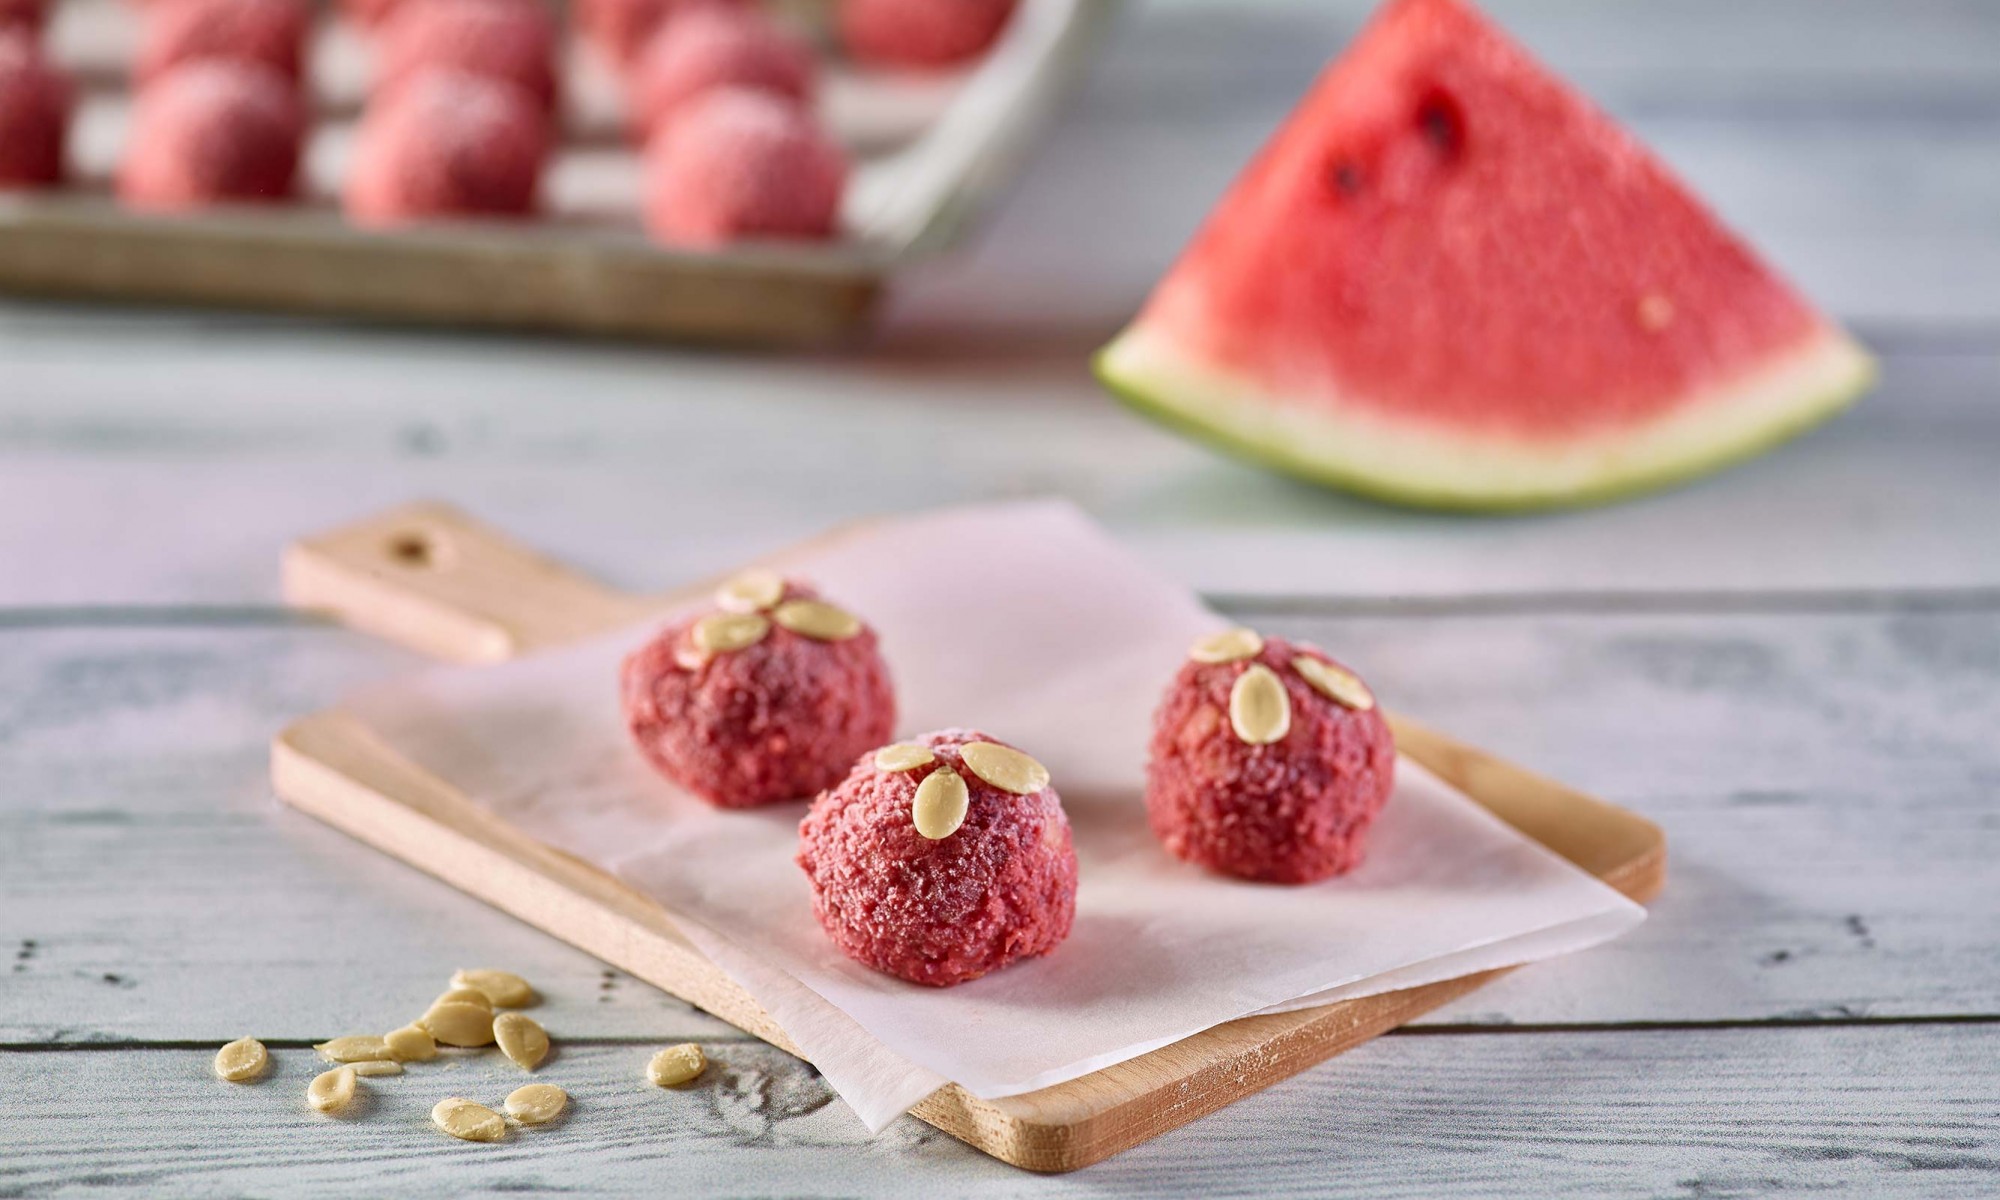 Watermelon Protein Bites set on parchment paper on small cutting board, garnished with watermelon seeds. Tray of more protein bites and wedge of watermelon in background